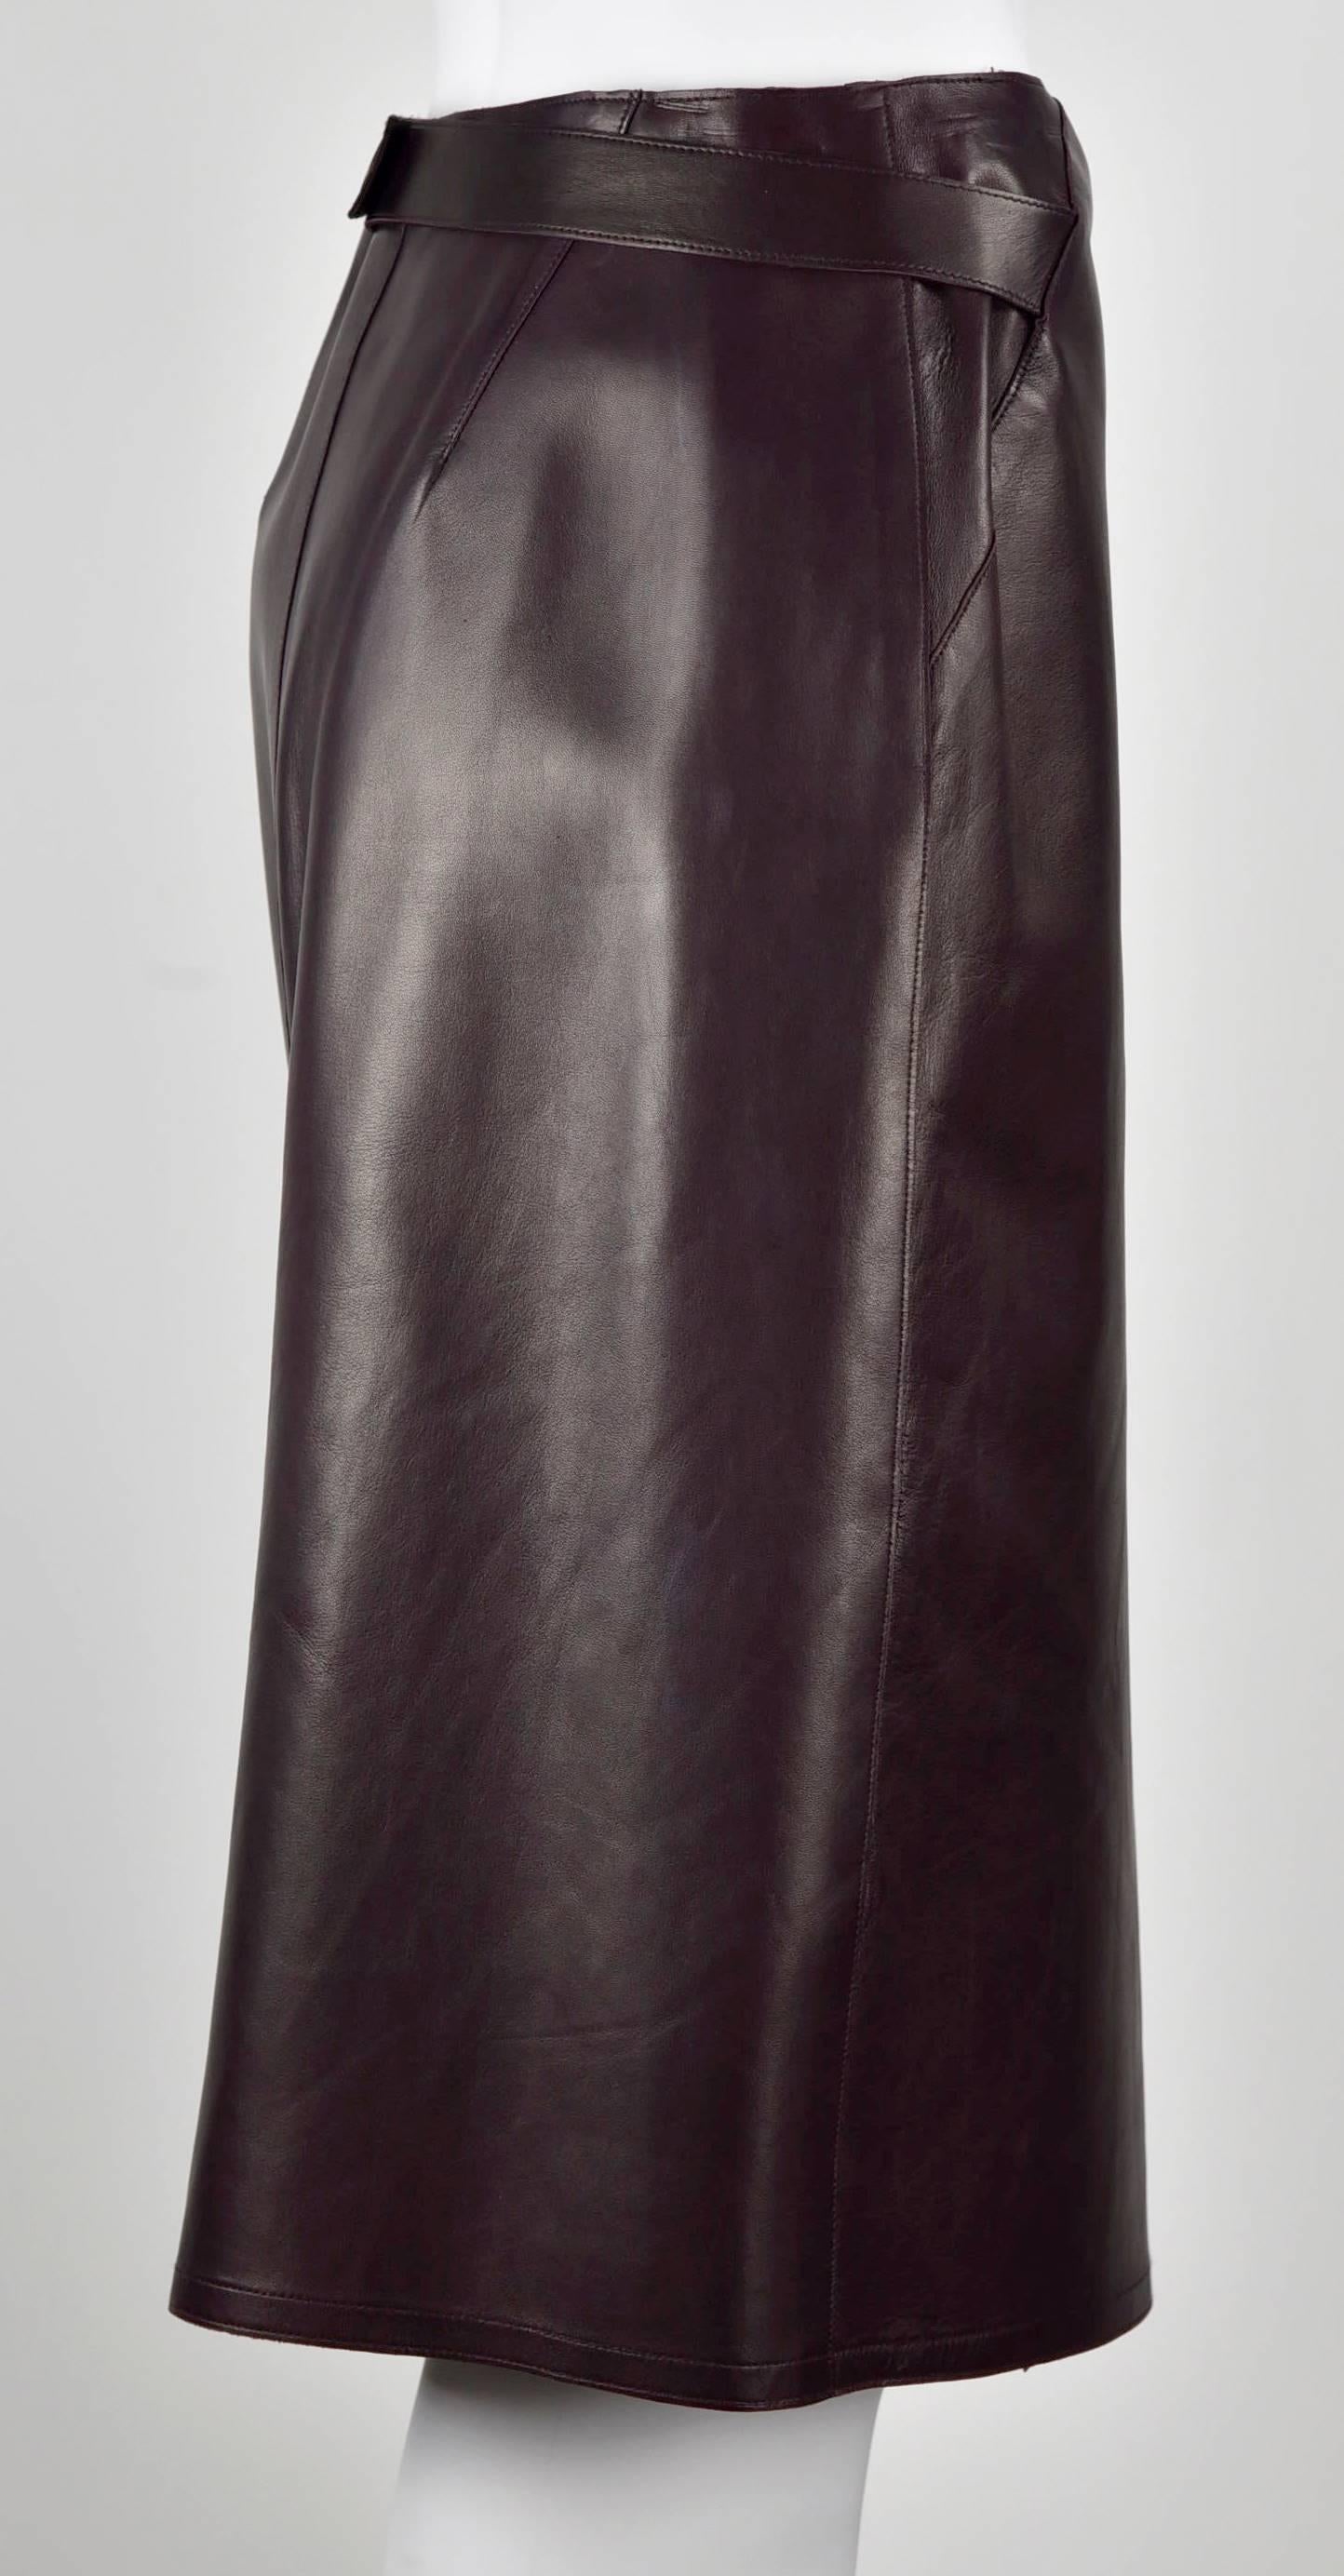   This skirt is a gorgeous aubergine color that works nicely with black jackets.  Measurements are:  Height 24", Waist 28", Hips 38" and wrapped Hem 42' A-line. 100% lambskin. A wrap skirt sometimes needs alteration adjustment to